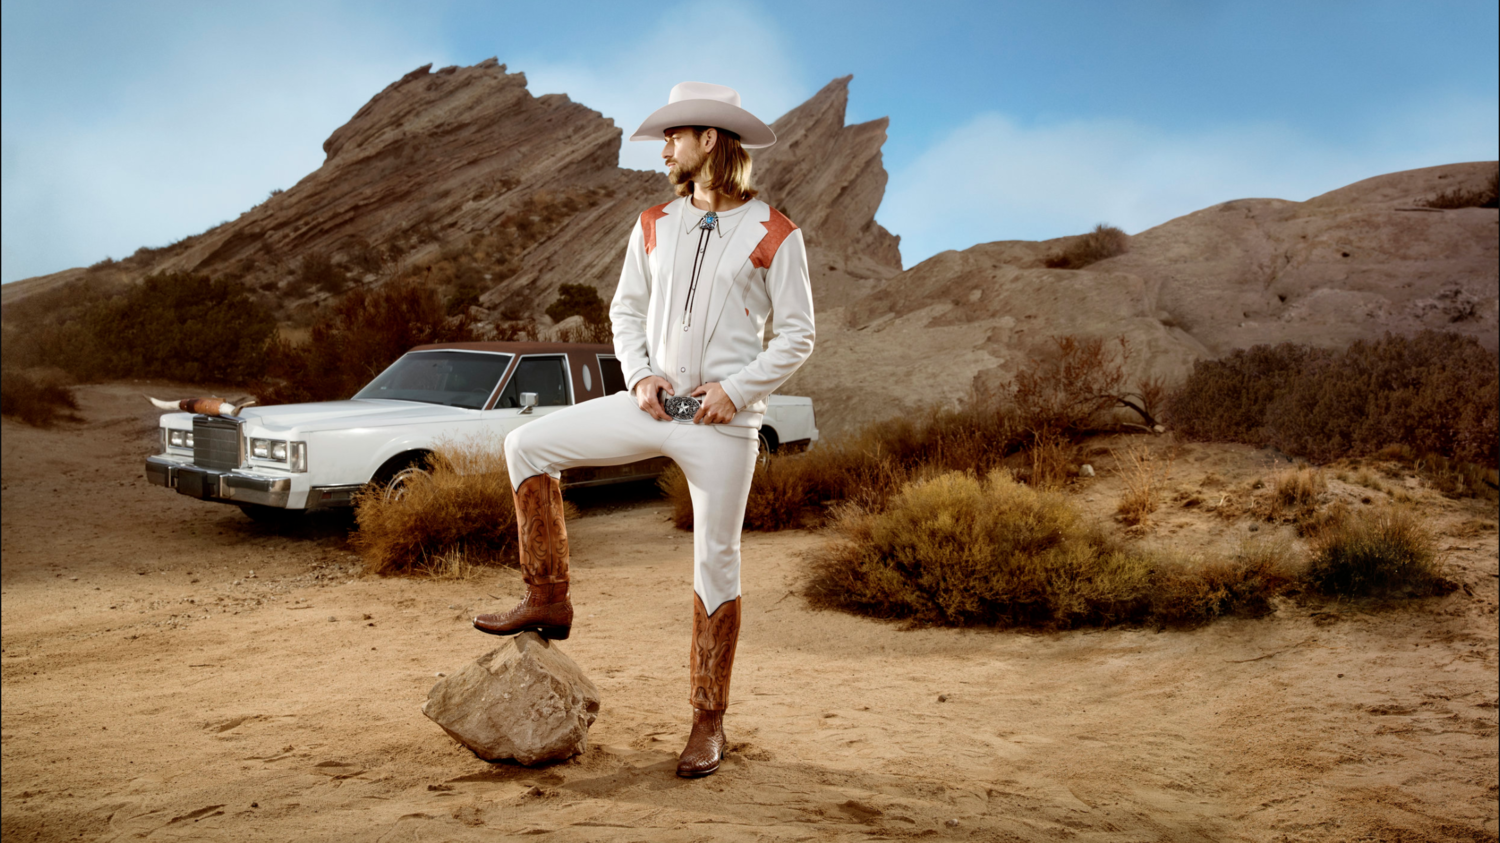  Fruit of the loom handsome cowboy in desert with vintage limo and big horns 